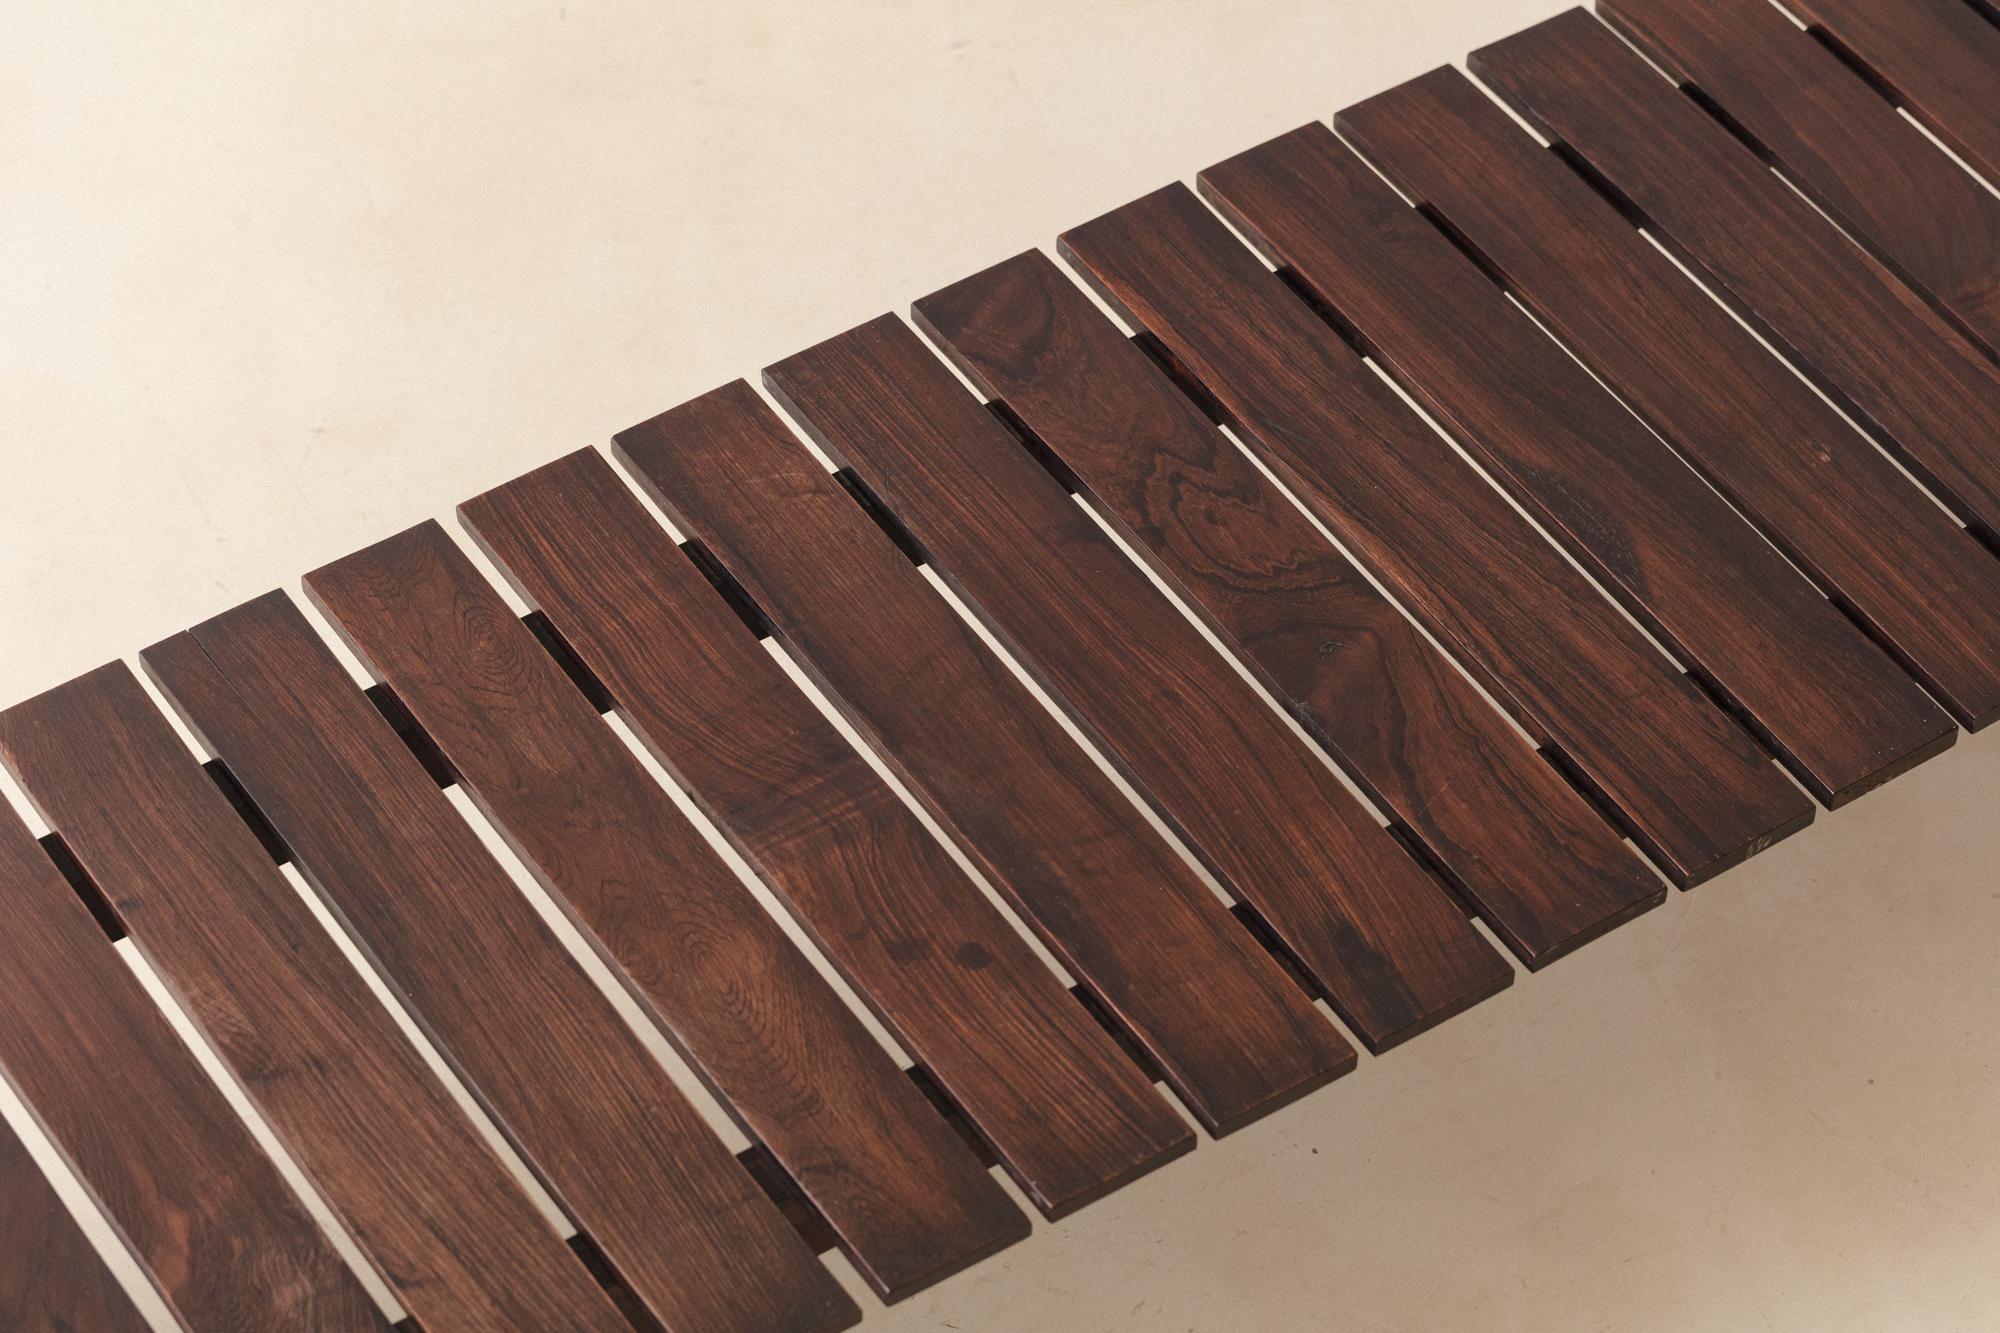 Mid-17th Century Rosewood Bench in by Celina Decorações, 1960s, Brazilian Midcentury Design For Sale